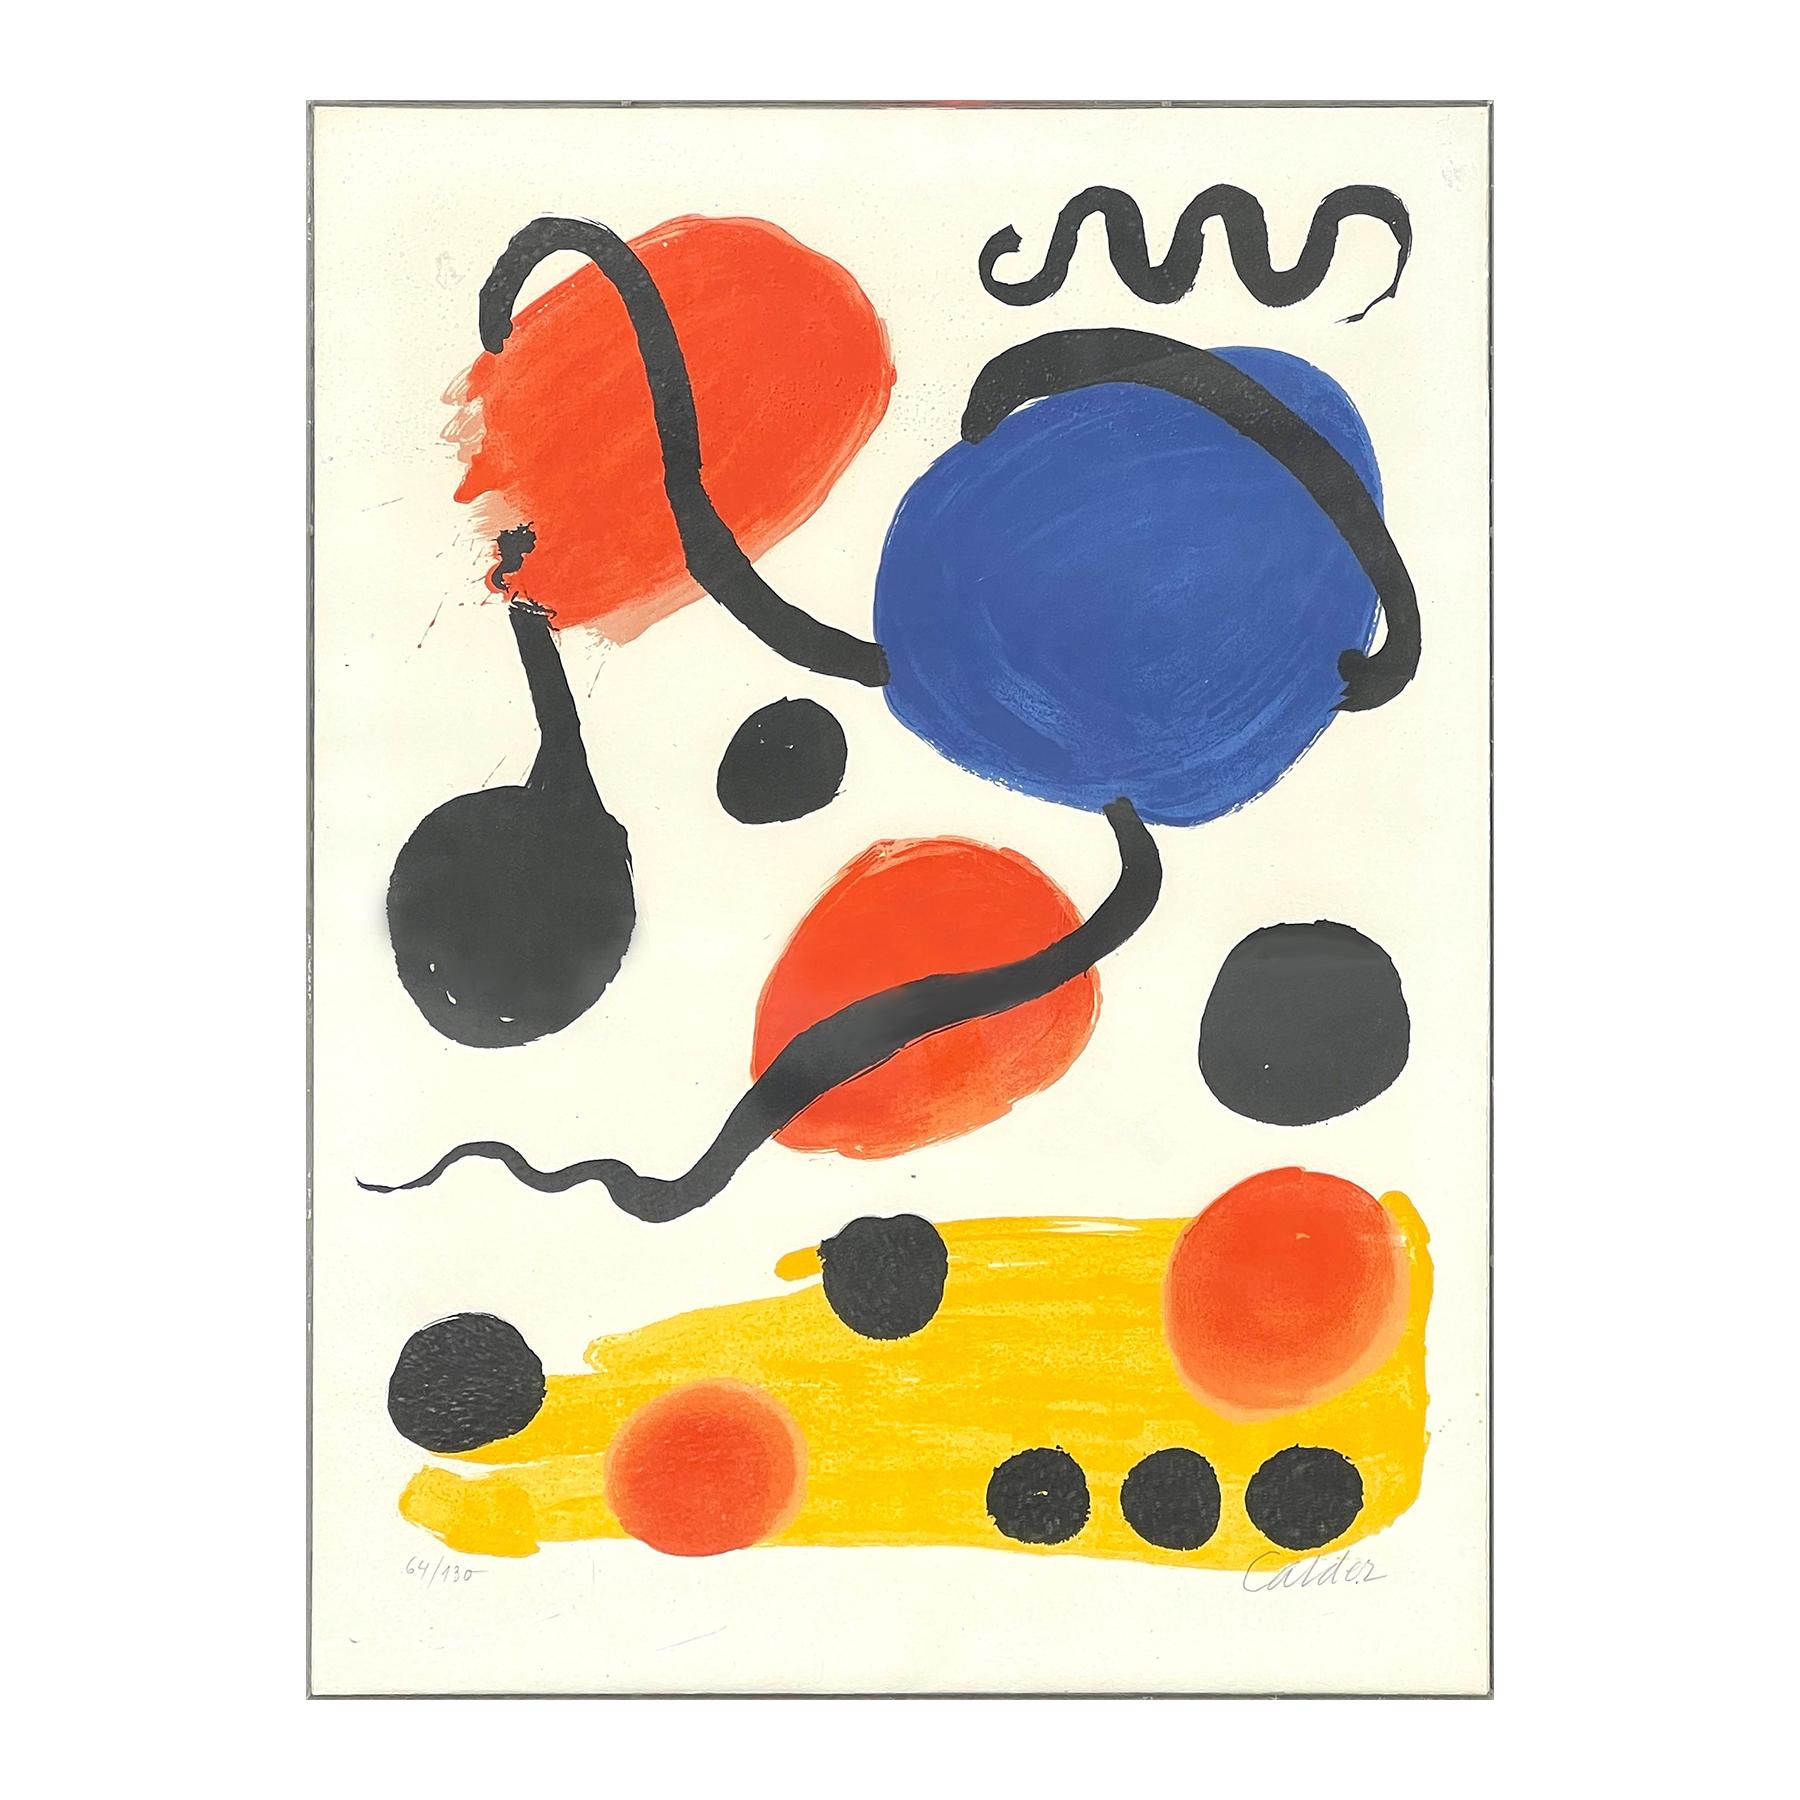 Modern Yellow, Red, & Blue Abstract Lithograph of Circles for Atelier Mourlot - Print by Alexander Calder